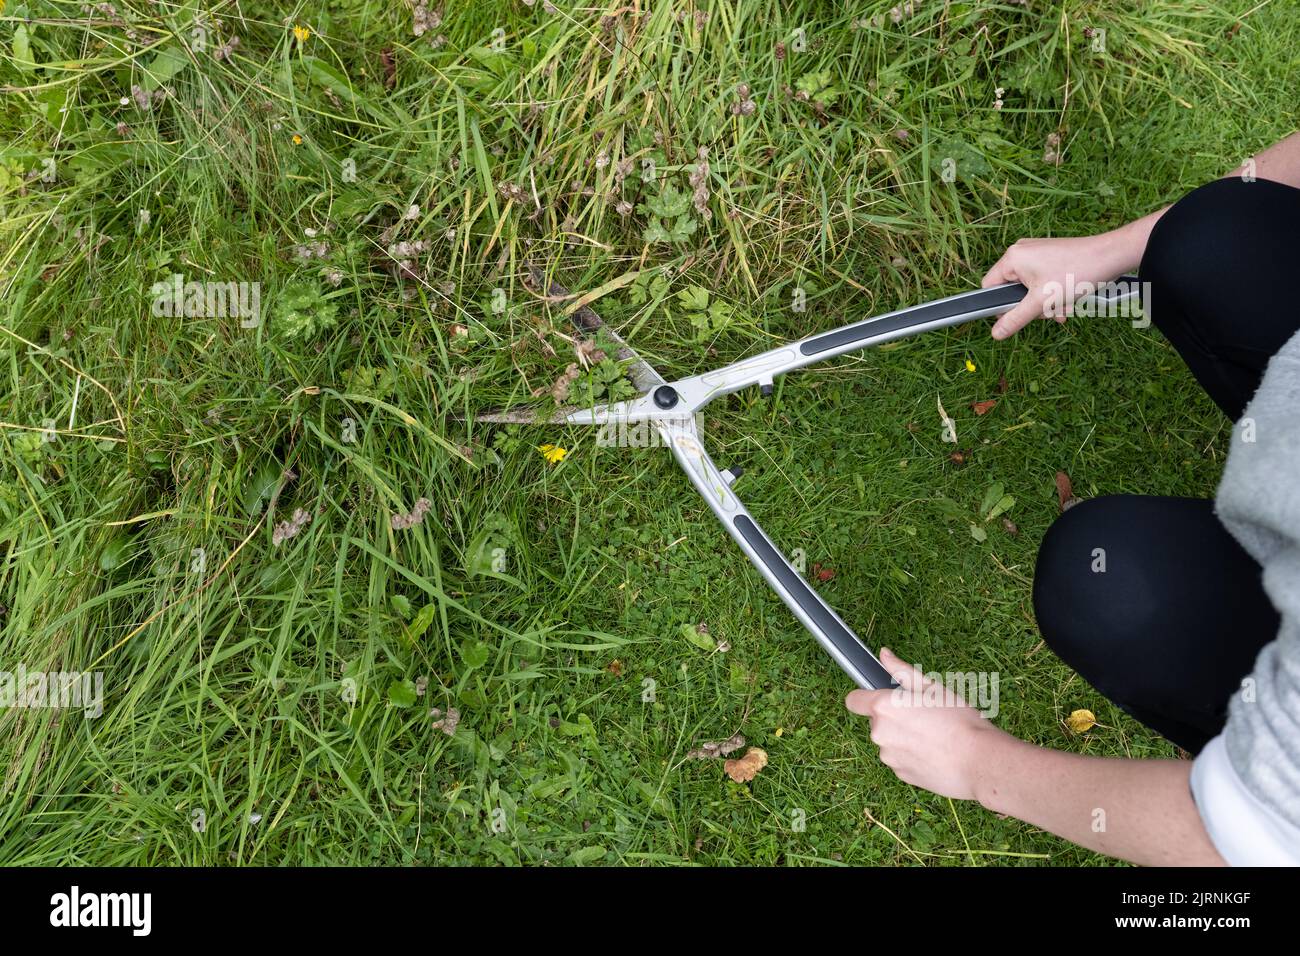 using hand shears to carefully cut a small area of grass that has been allowed to grow long for wildlife in case amphibians are sheltering - UK Stock Photo